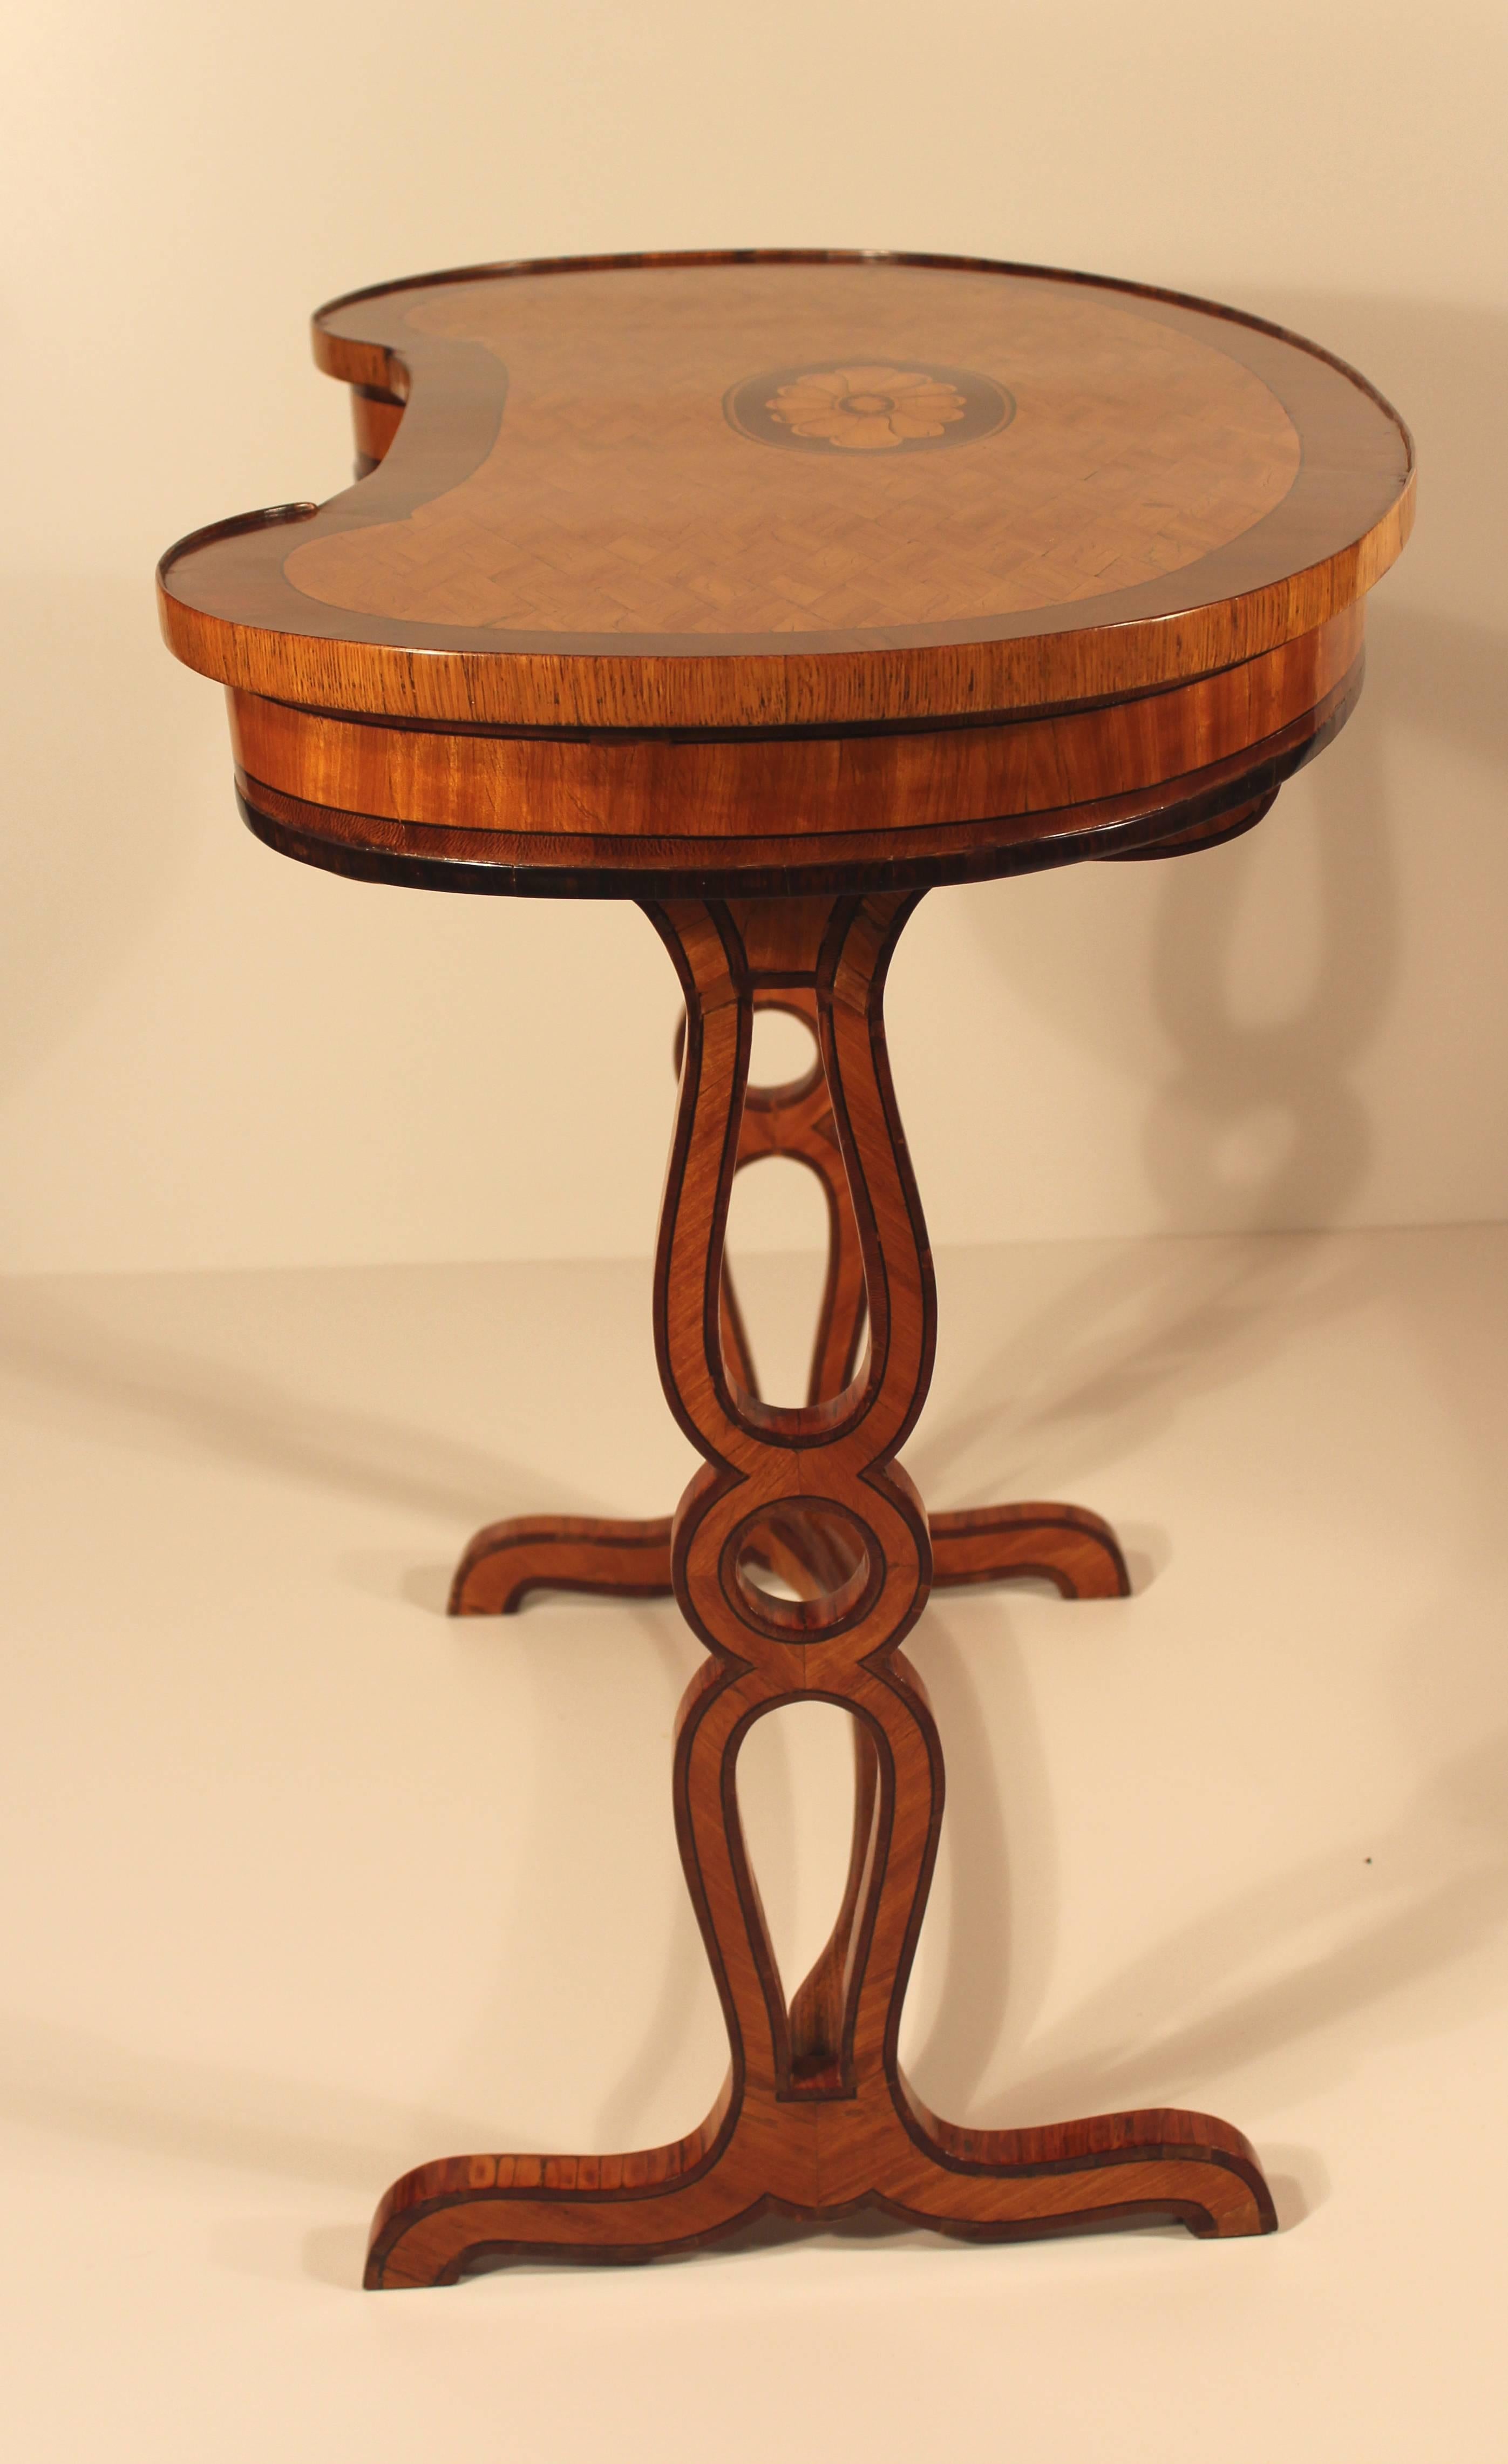 Exquisite kidney shaped table, cherrywood, mahogany and elmwood veneer, the top with lozenge-shaped marquetry and an oval shaped flower medallion. The table is raised by two pierced trestle supports joined by a straight stretcher, all parts are